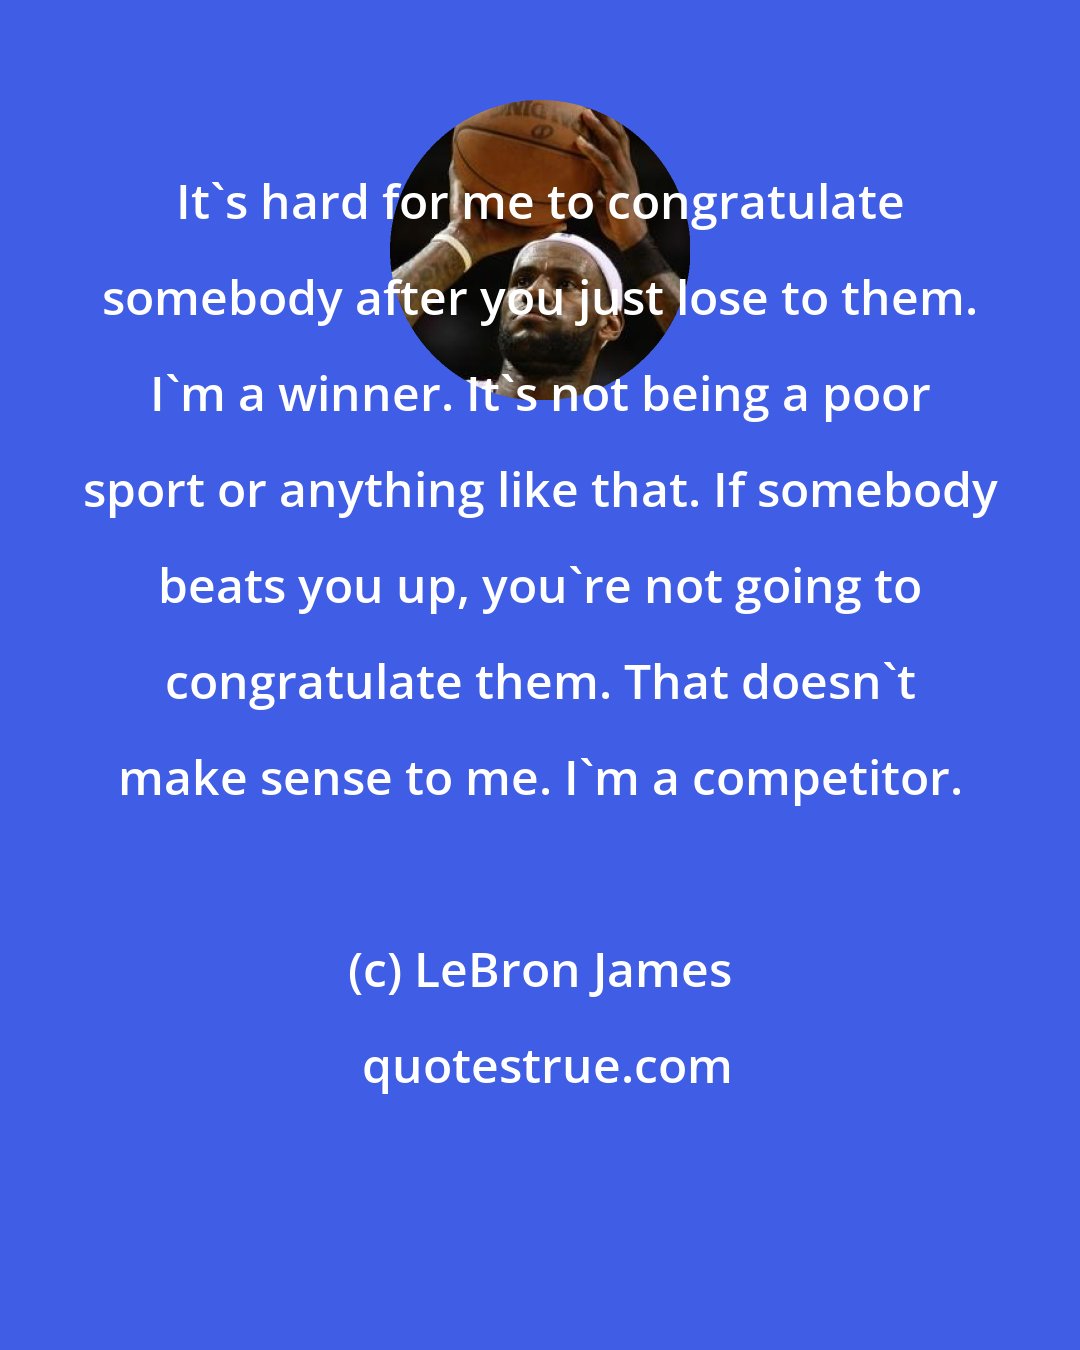 LeBron James: It's hard for me to congratulate somebody after you just lose to them. I'm a winner. It's not being a poor sport or anything like that. If somebody beats you up, you're not going to congratulate them. That doesn't make sense to me. I'm a competitor.